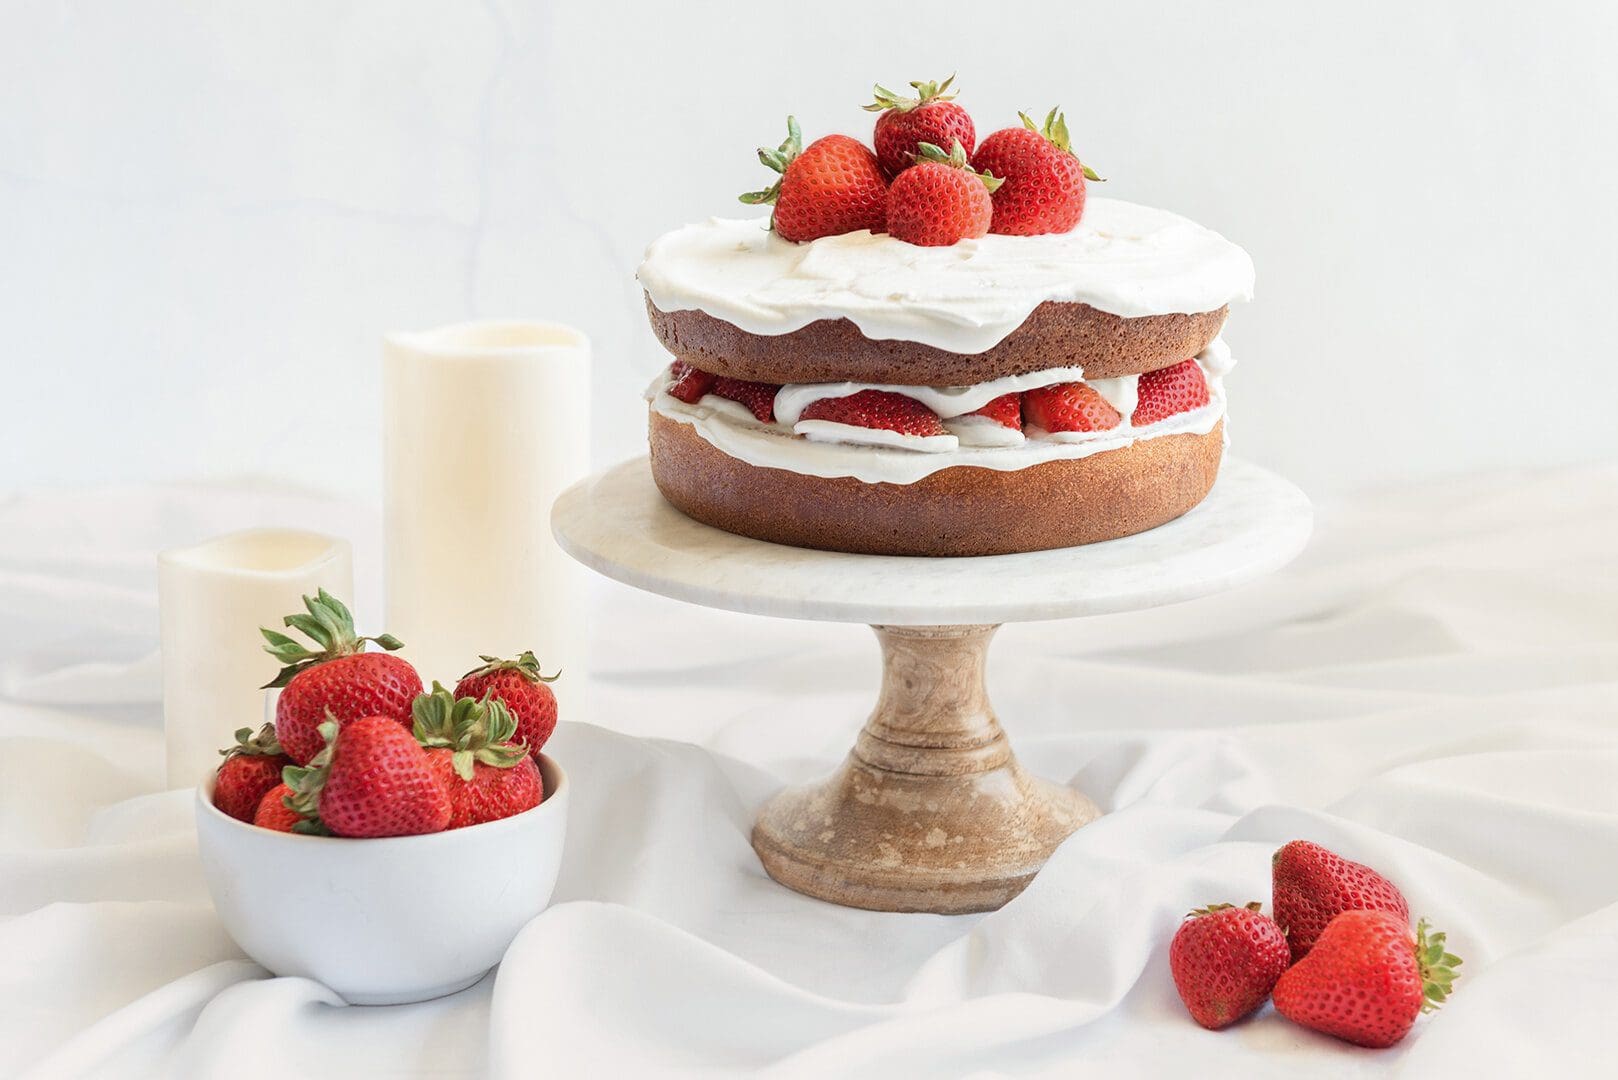 Instant Pot Strawberry Cake • Simple Sumptuous Cooking